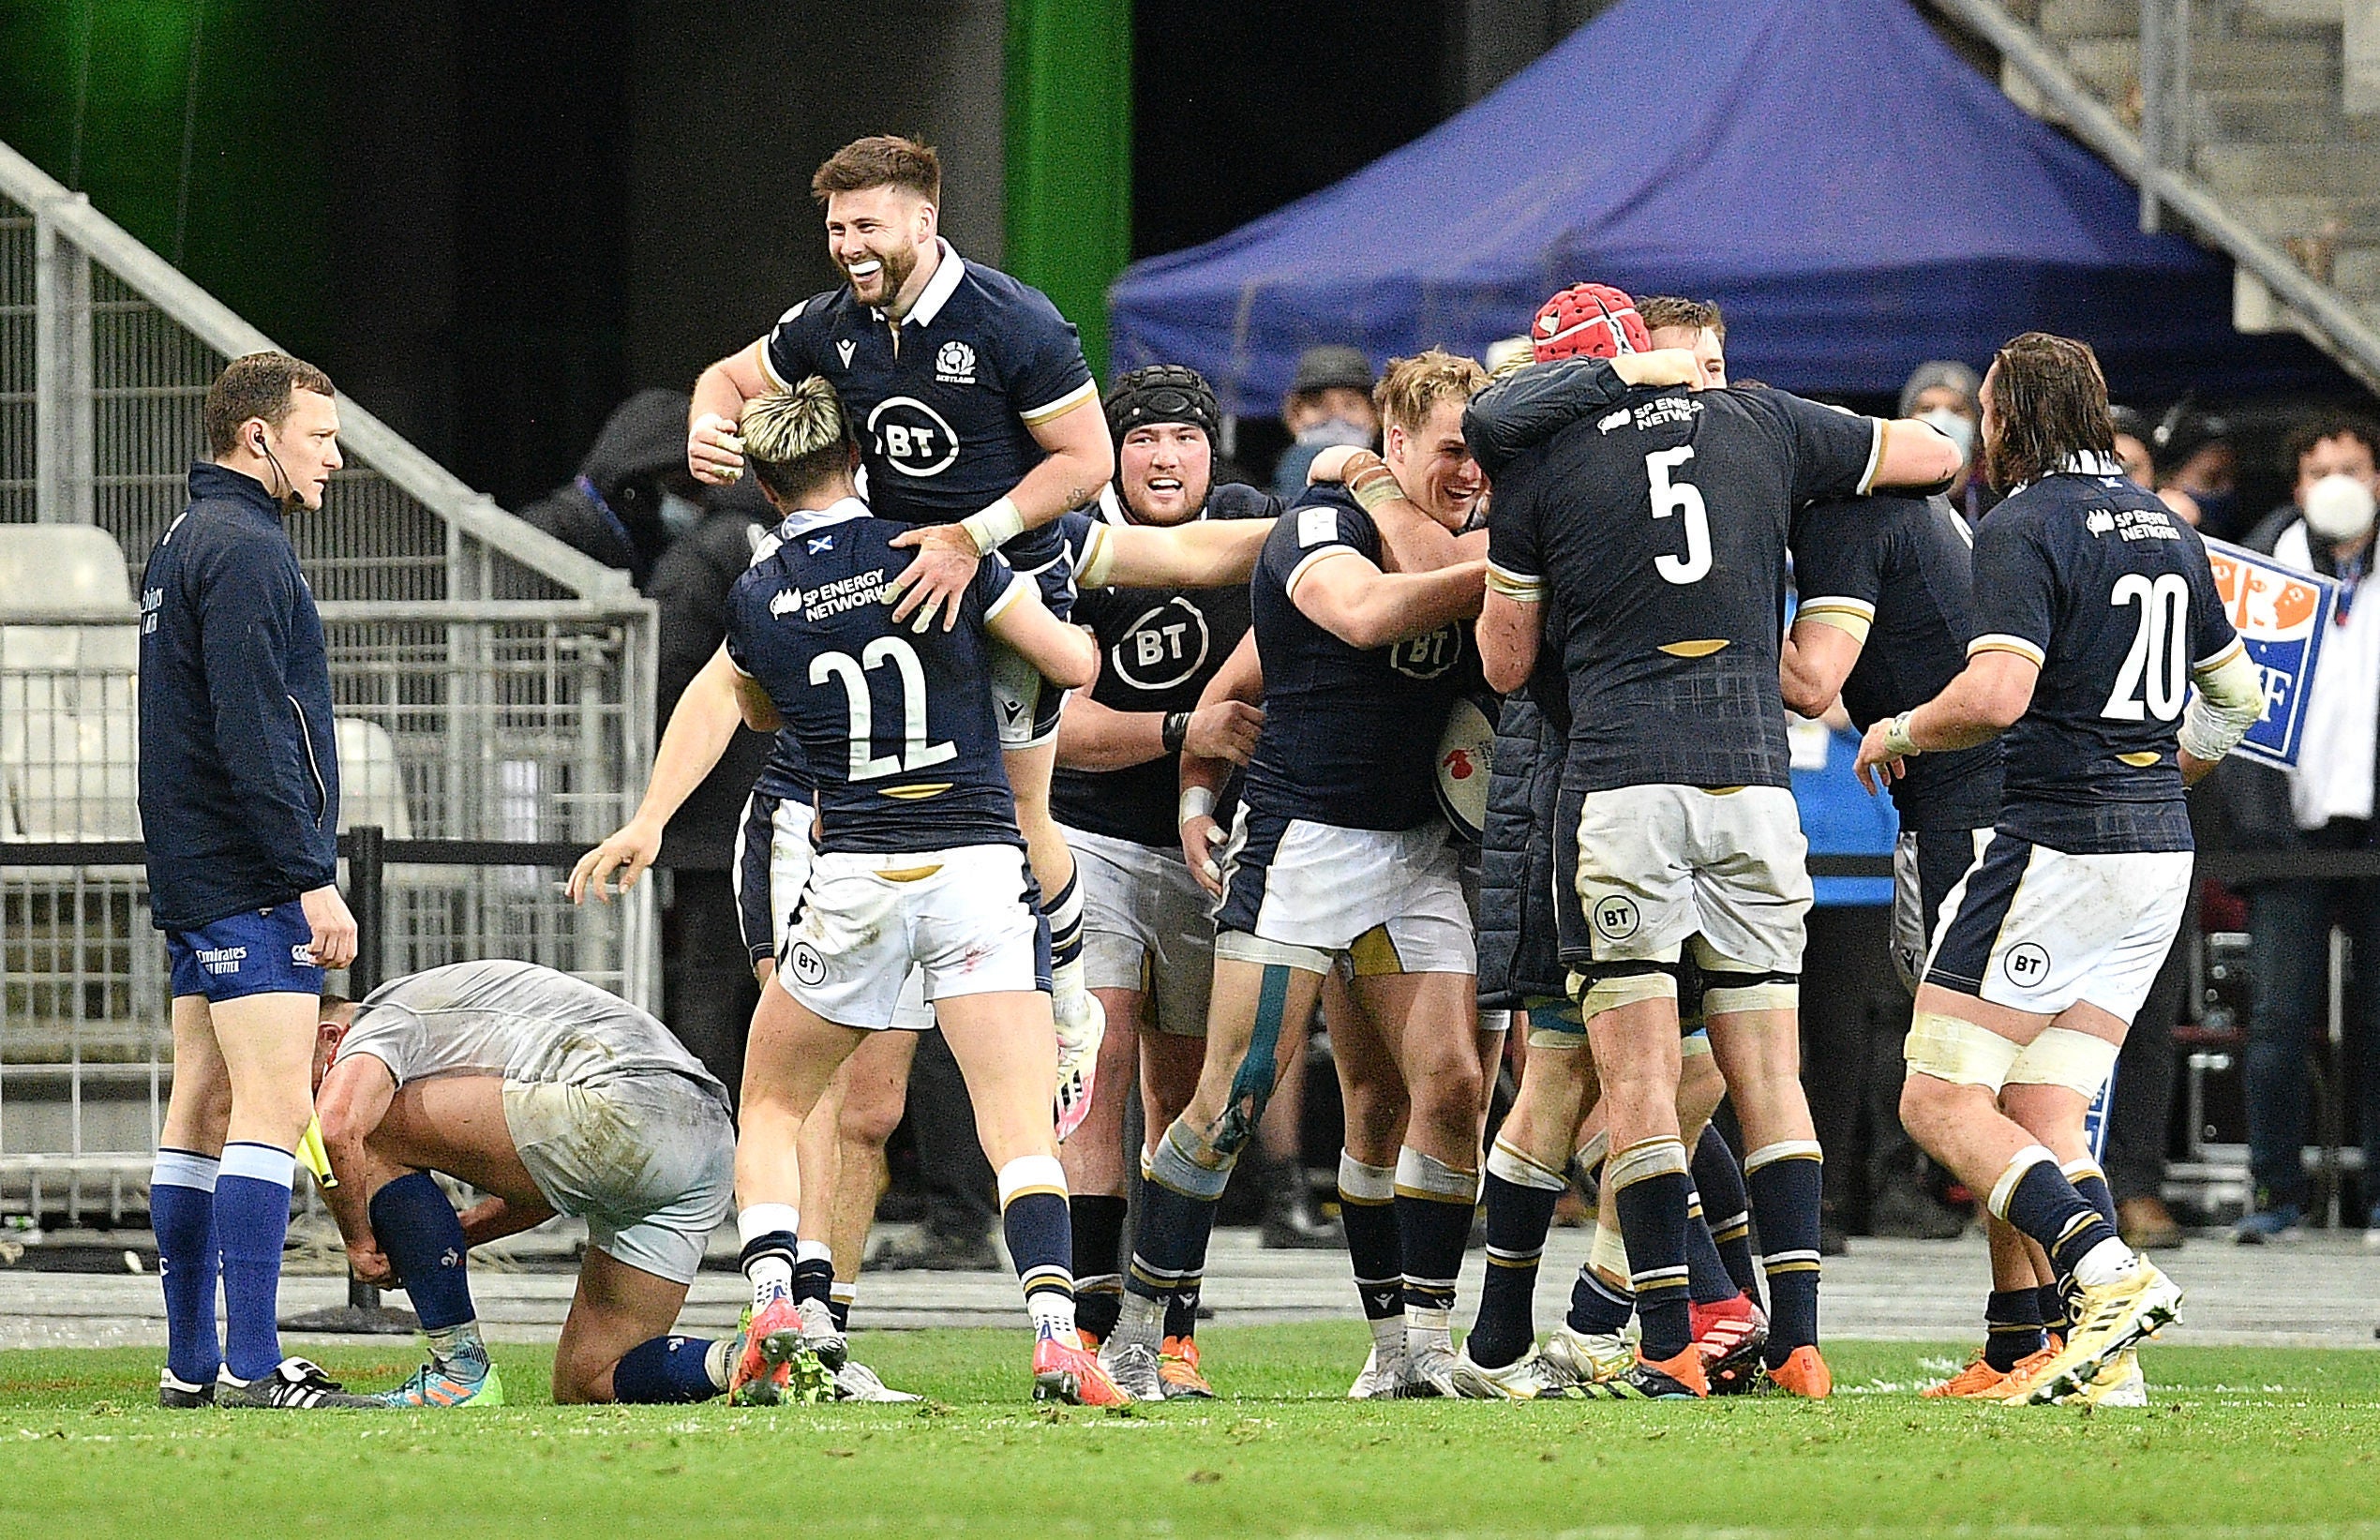 Scotland celebrate after their last-gasp try